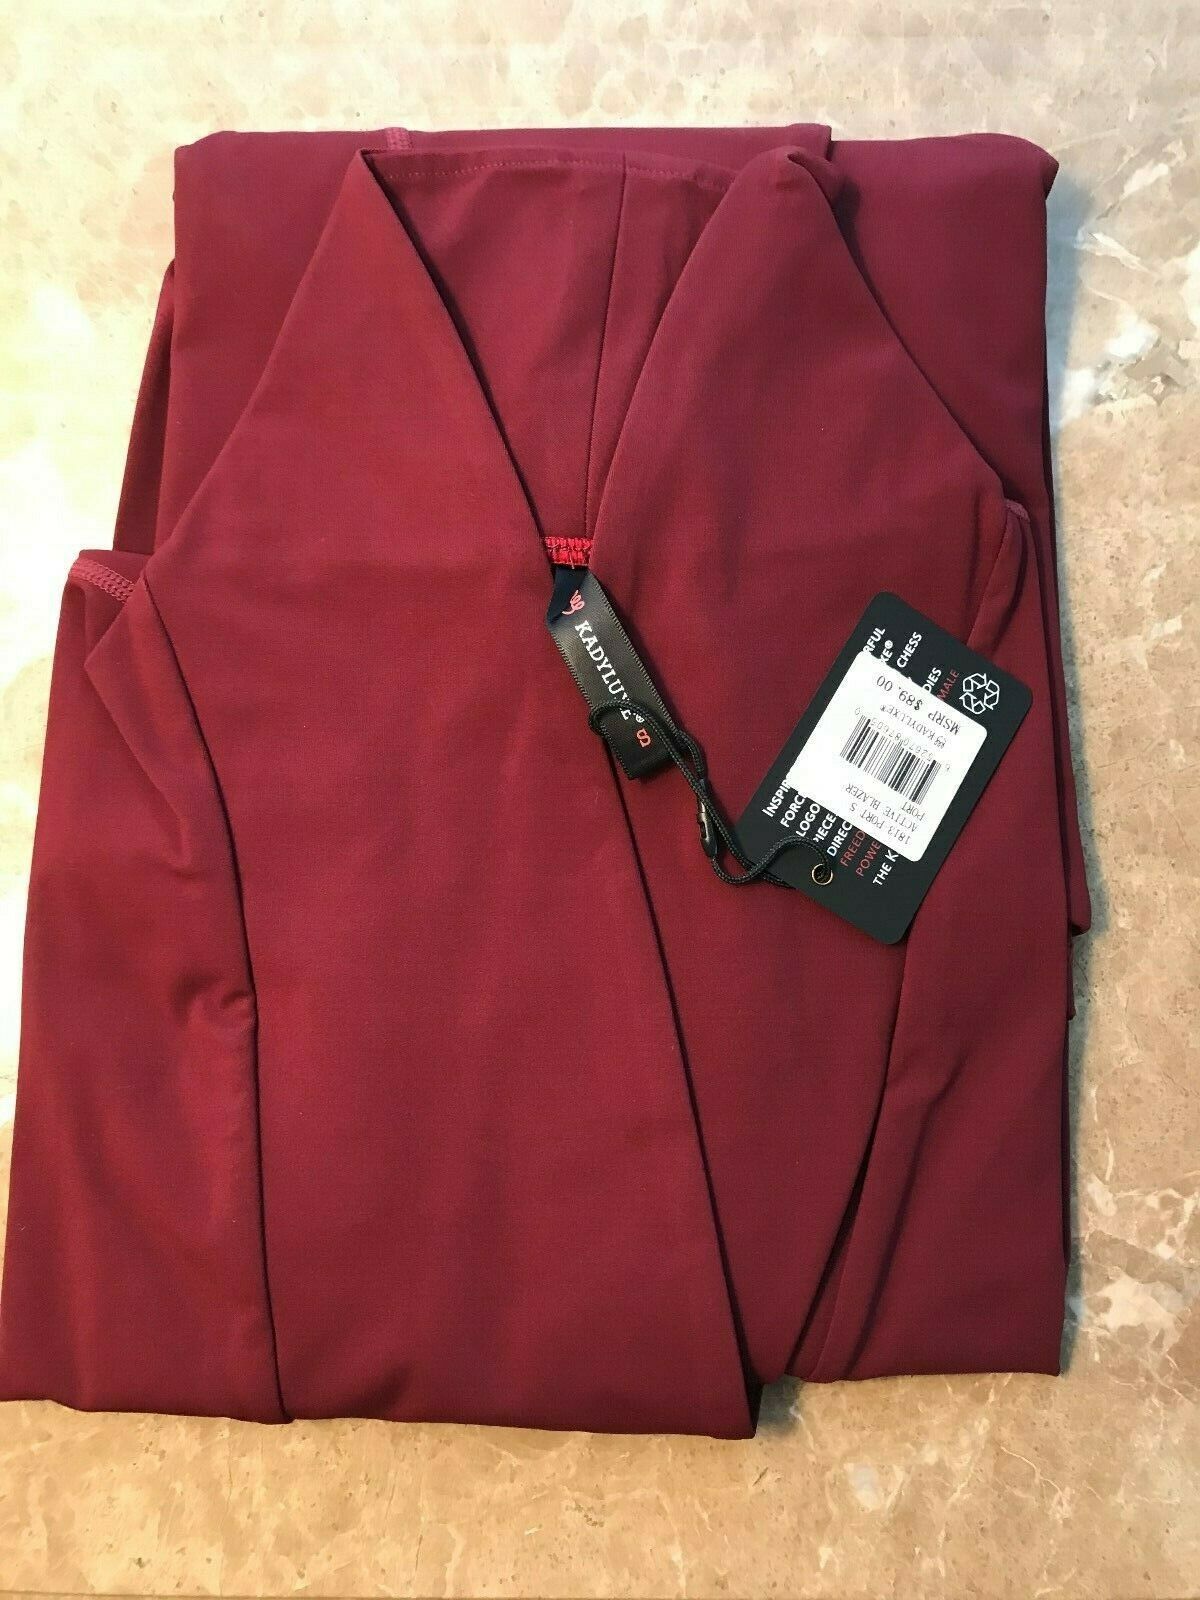 T133 Kadyluxe Womens Active Blazer New Size Small Color Maroon